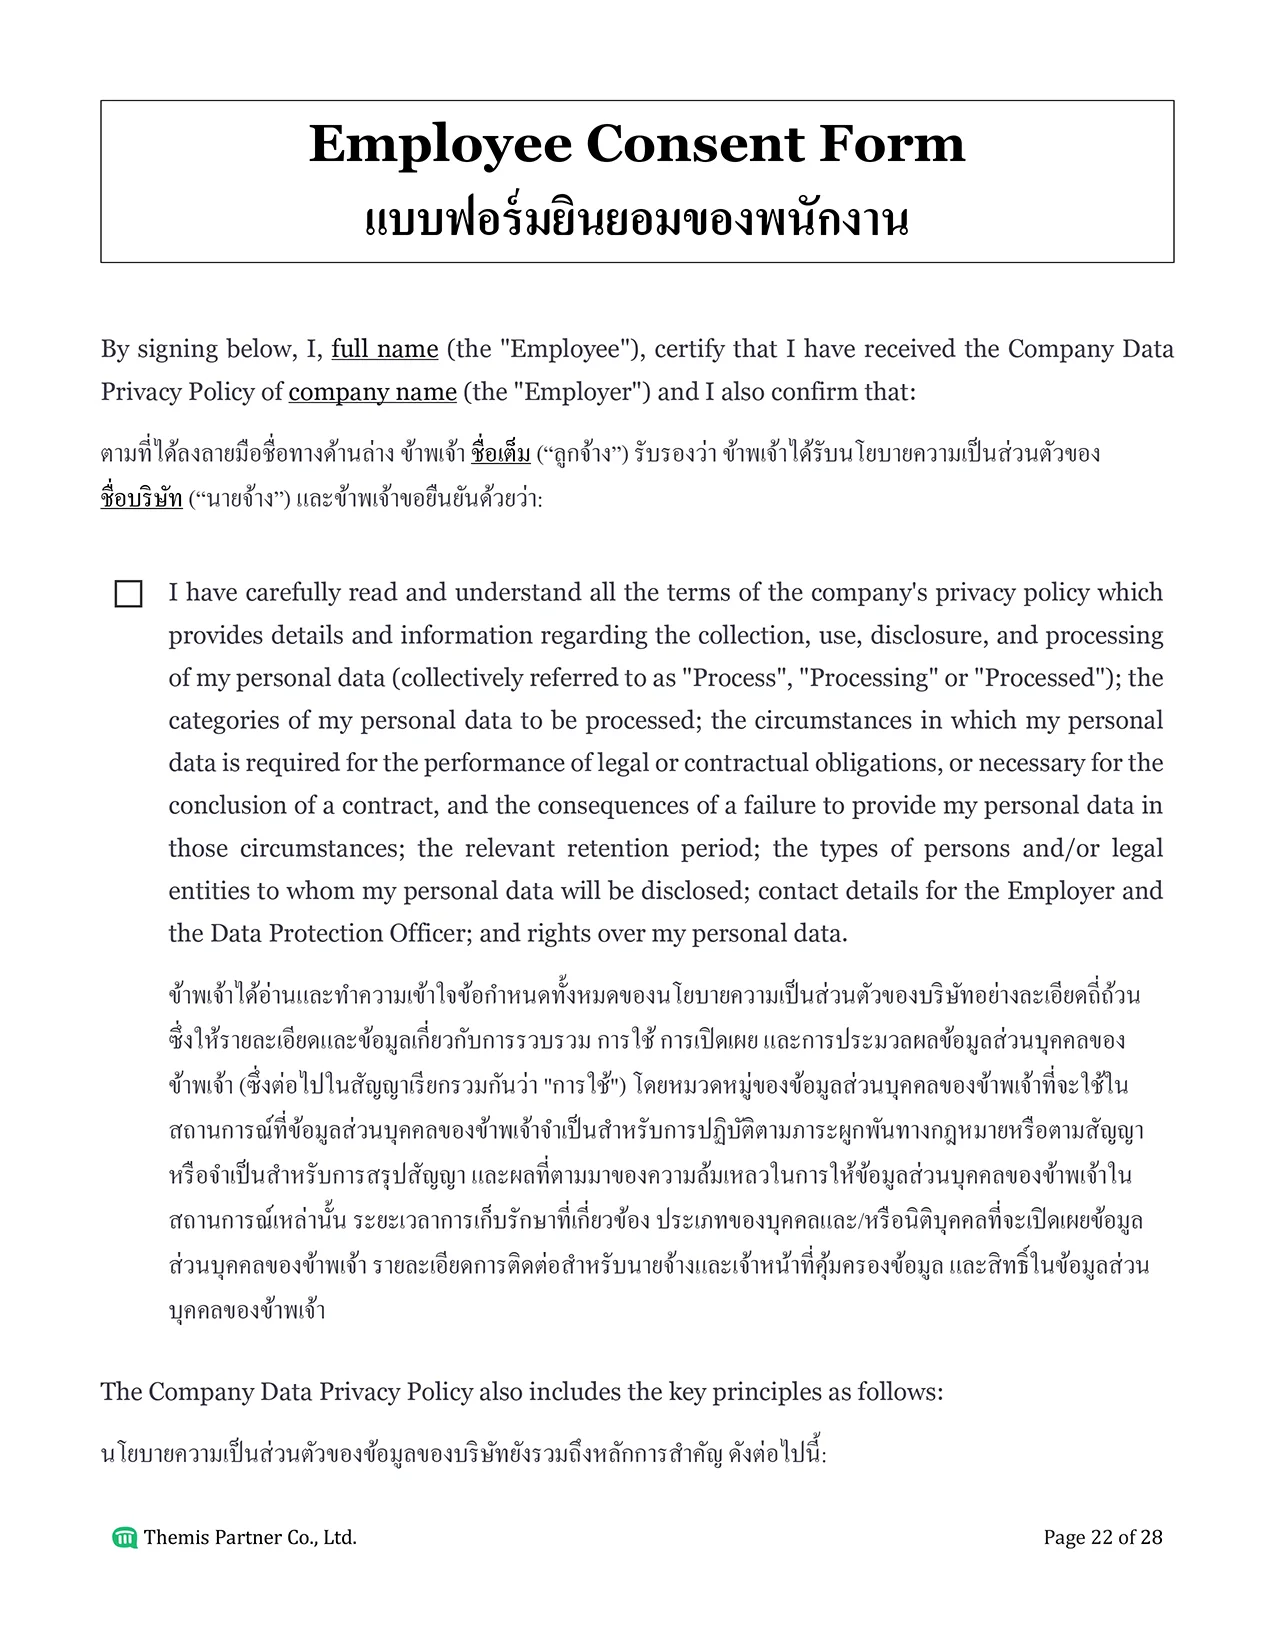 PDPA consent form and company policy Thailand 22